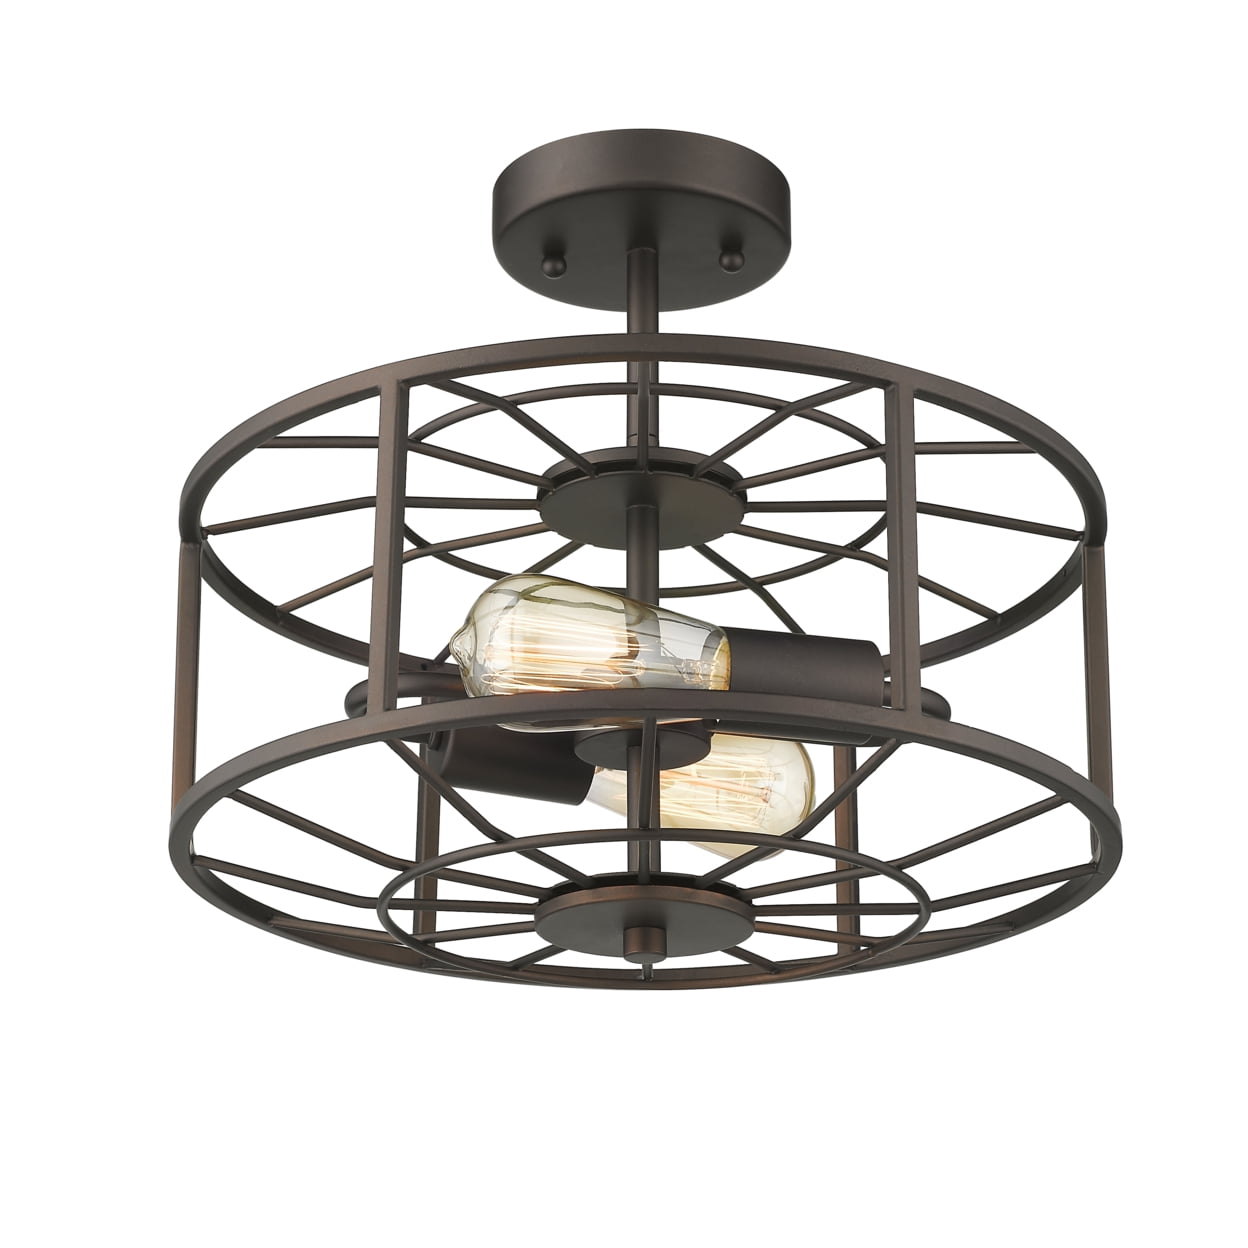 Ch2d007rb14-sf2 Ironclad Industrial 2 Light Rubbed Bronze Semi-flush Ceiling Fixture - 14 In.